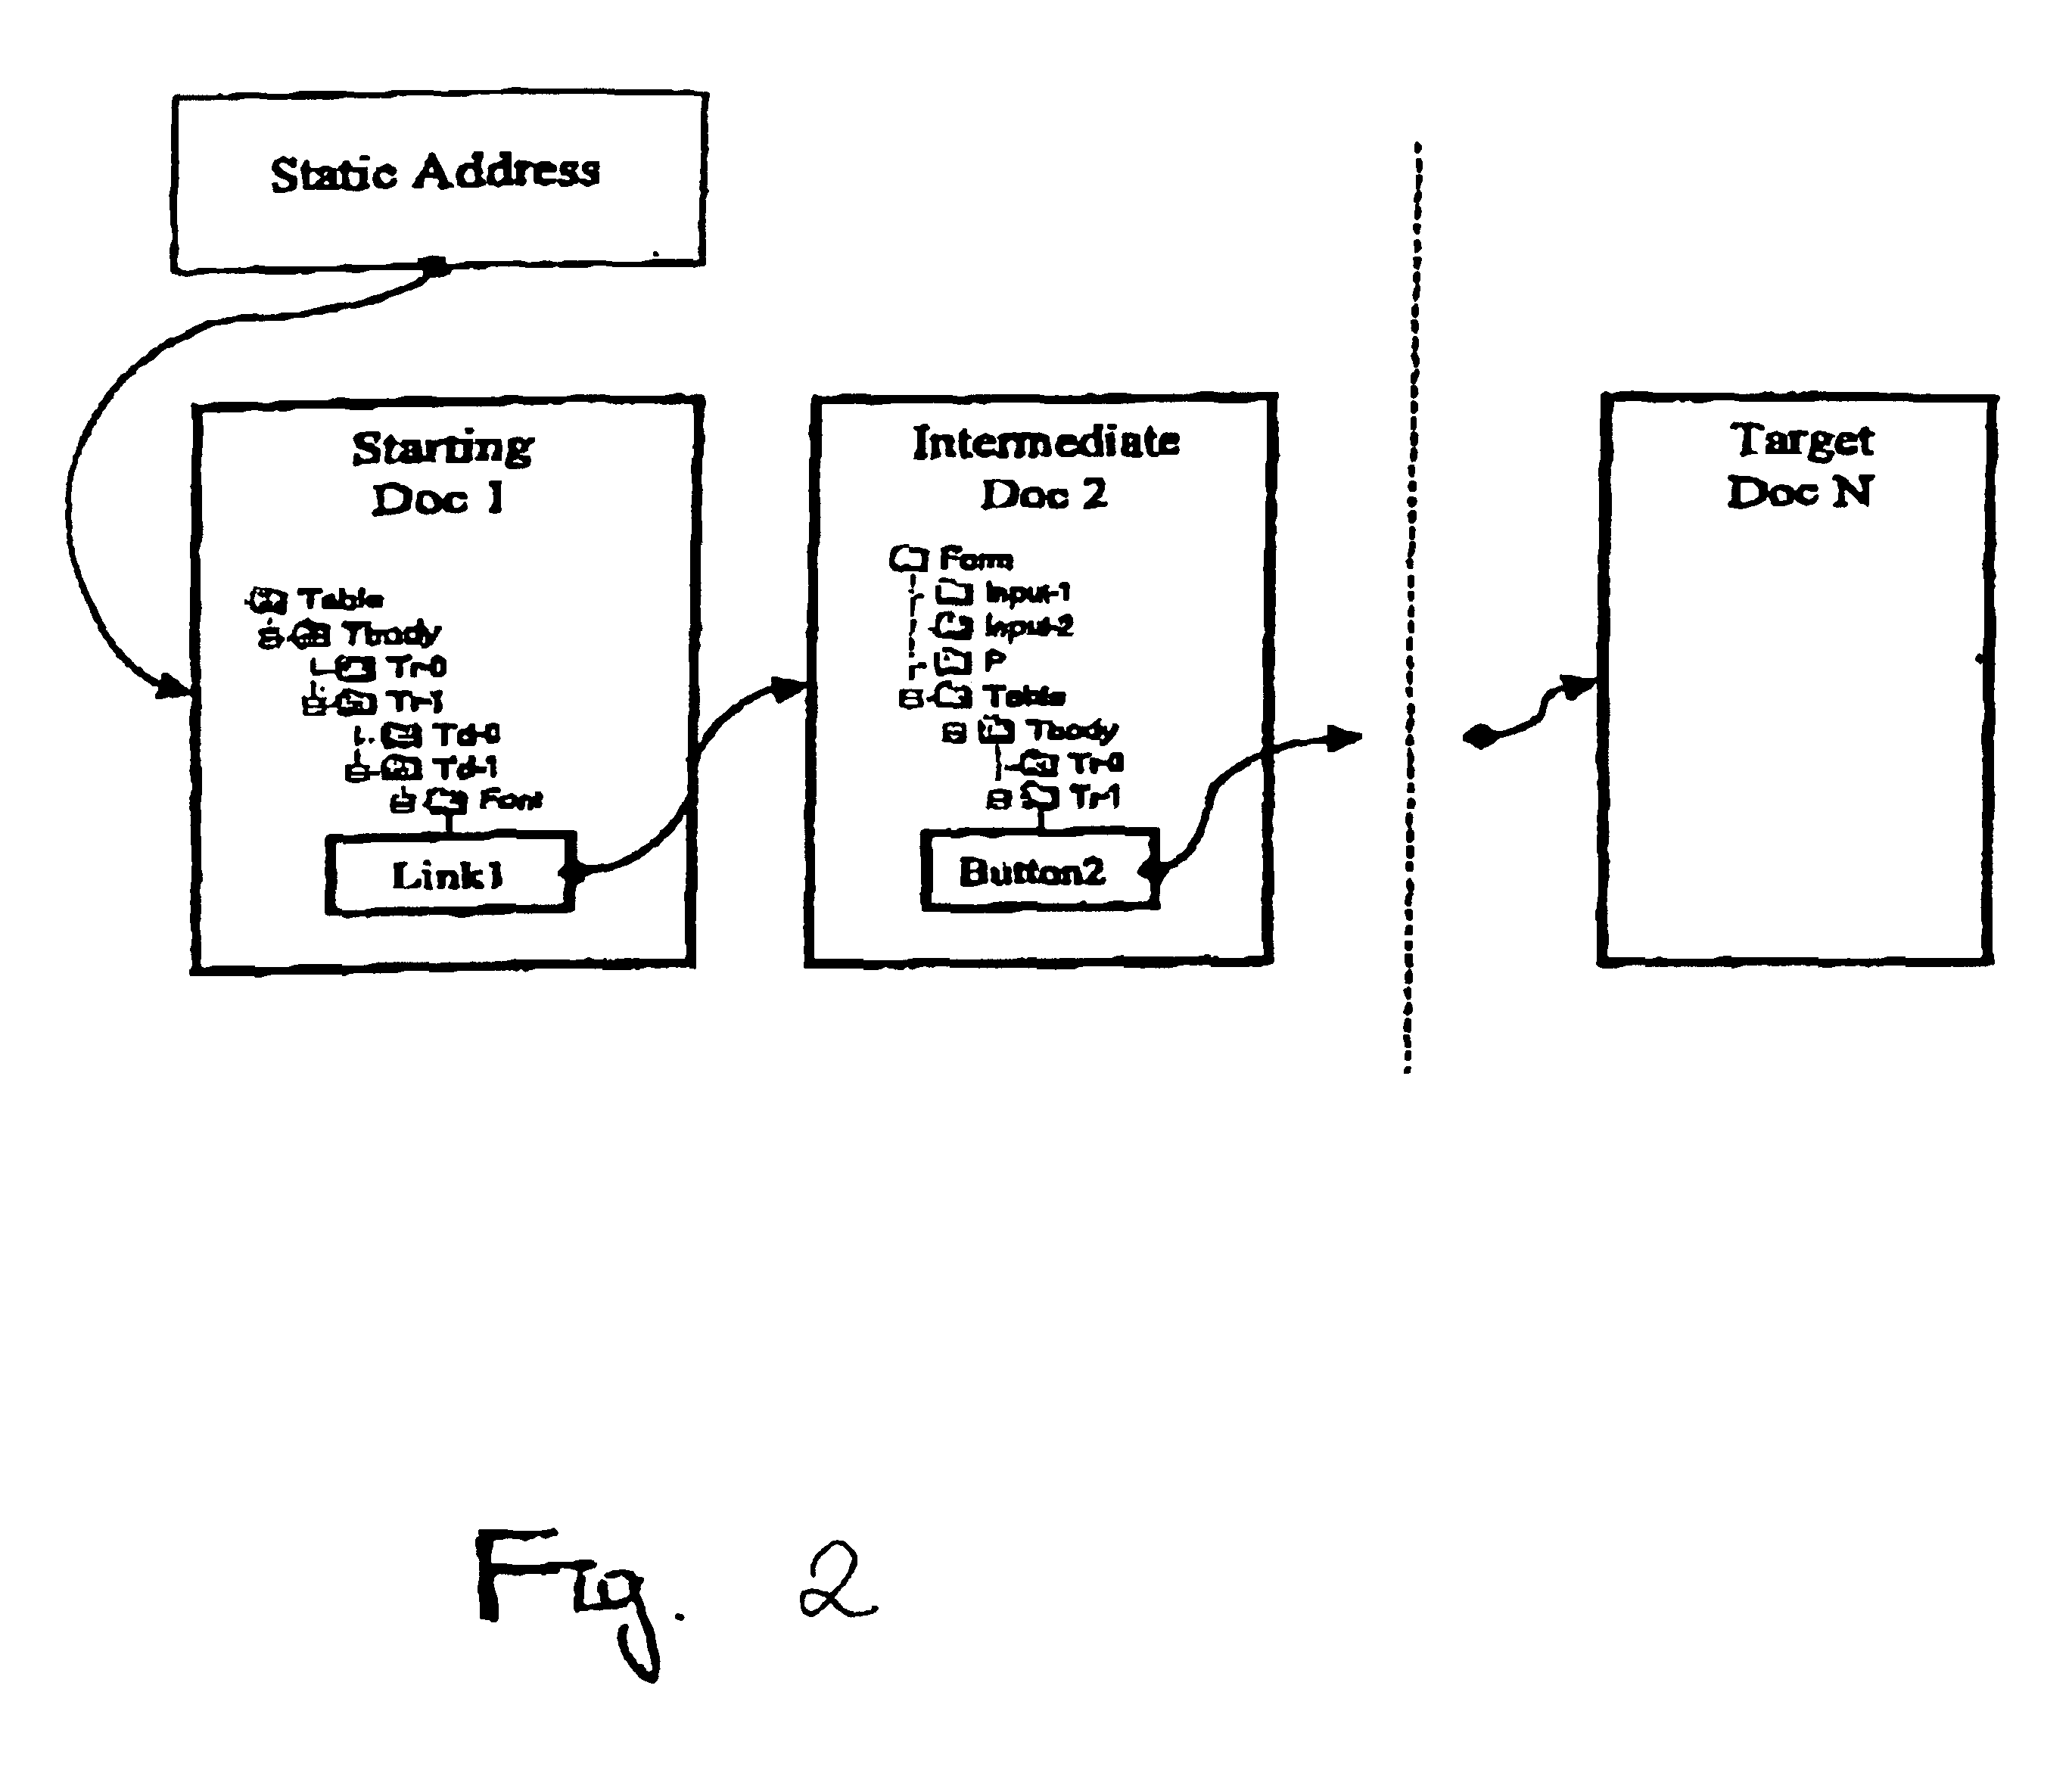 System and method for automatic retrieval of structured online documents